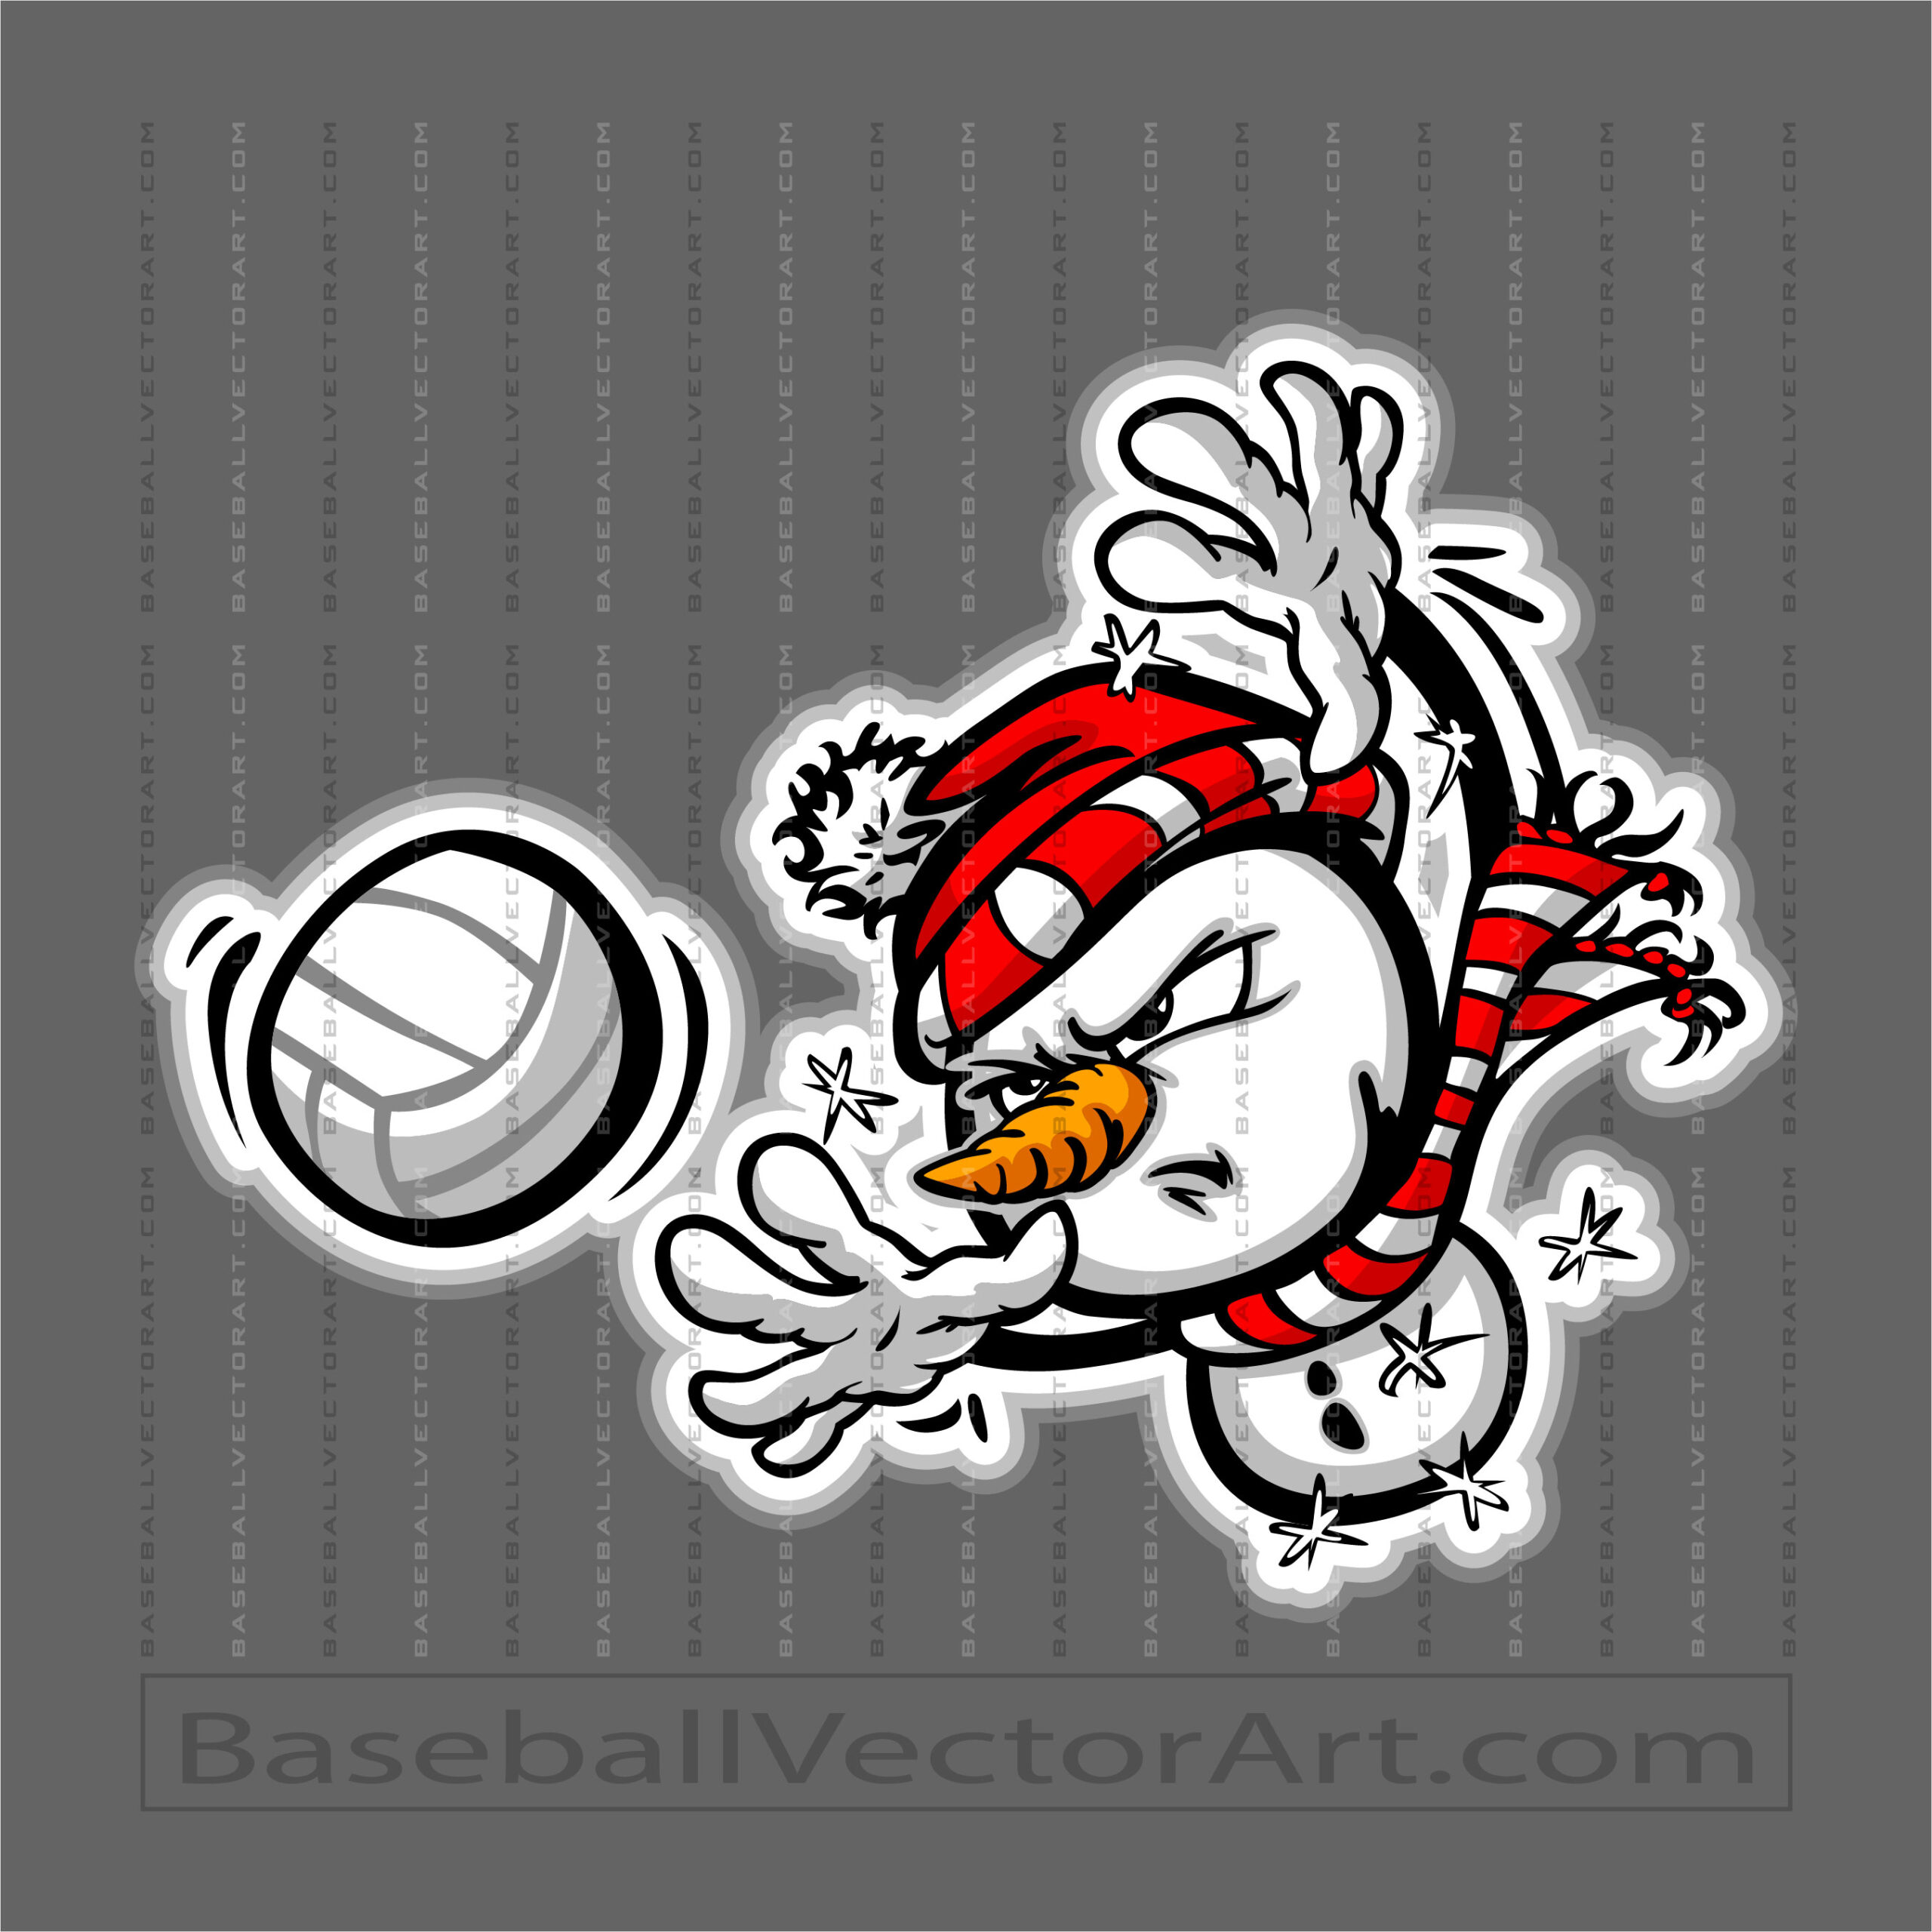 Volleyball Snowman Vector Image